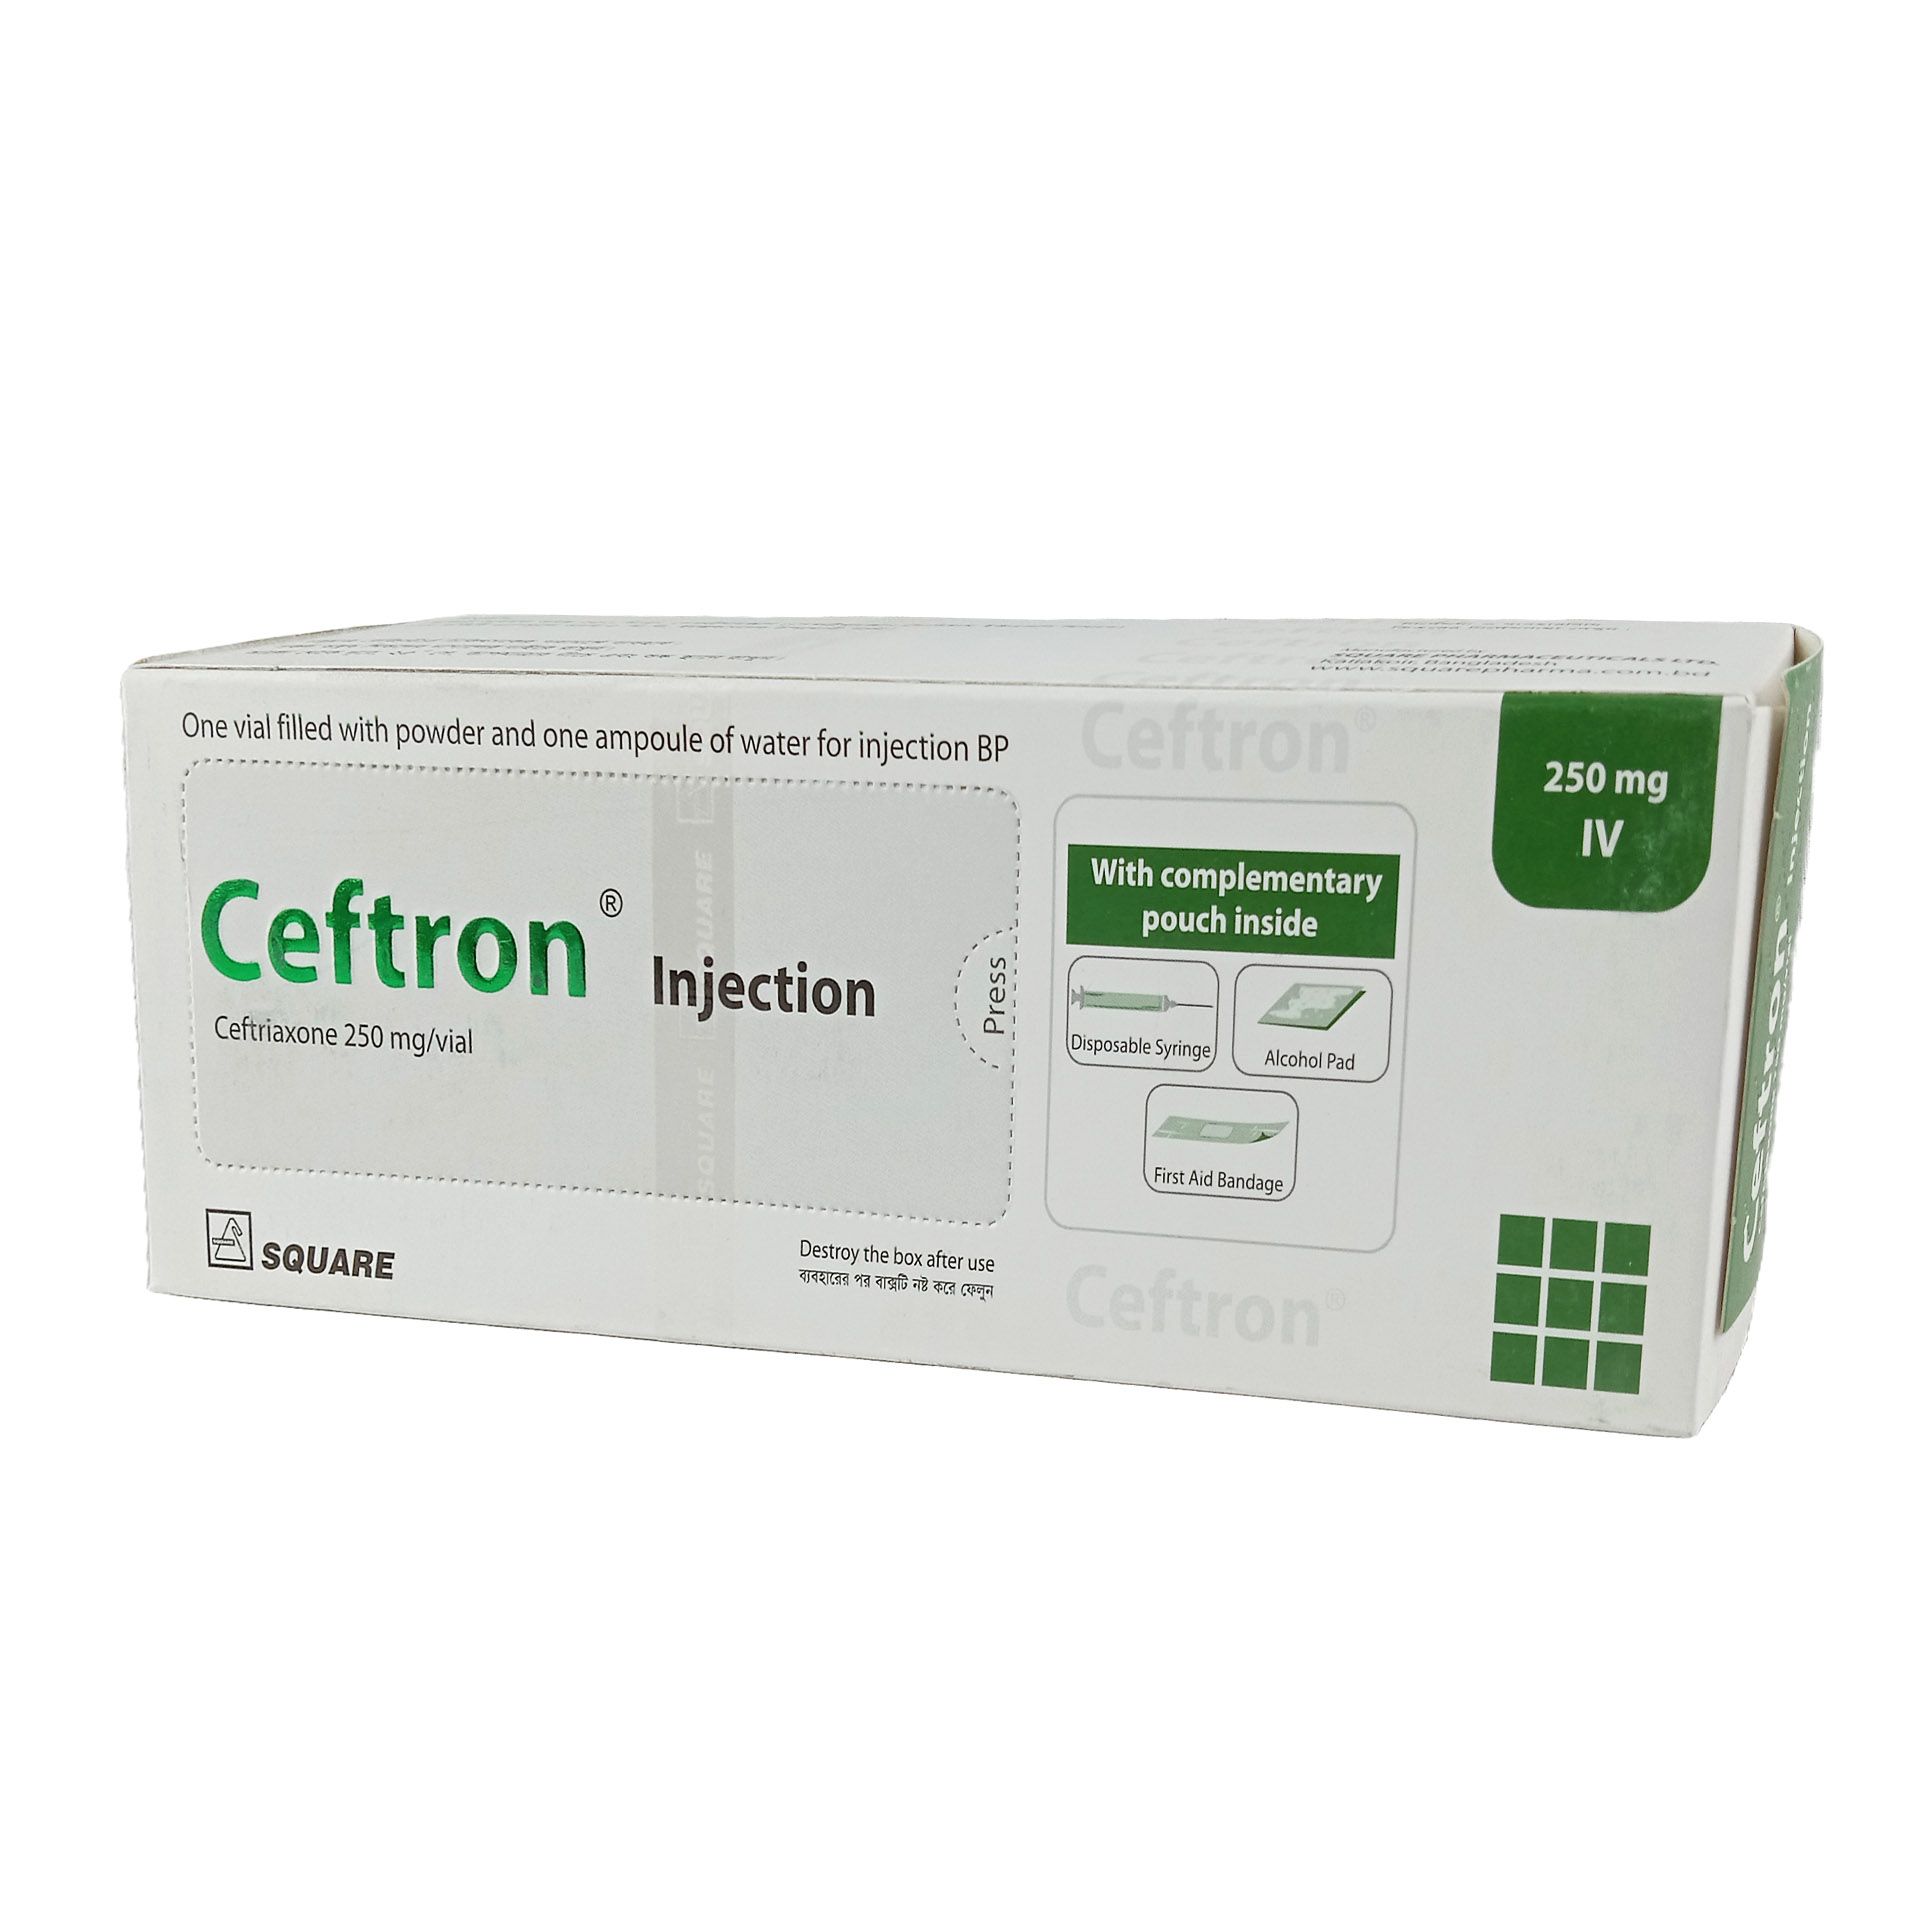 Ceftron 250 IV 250mg/vial Injection